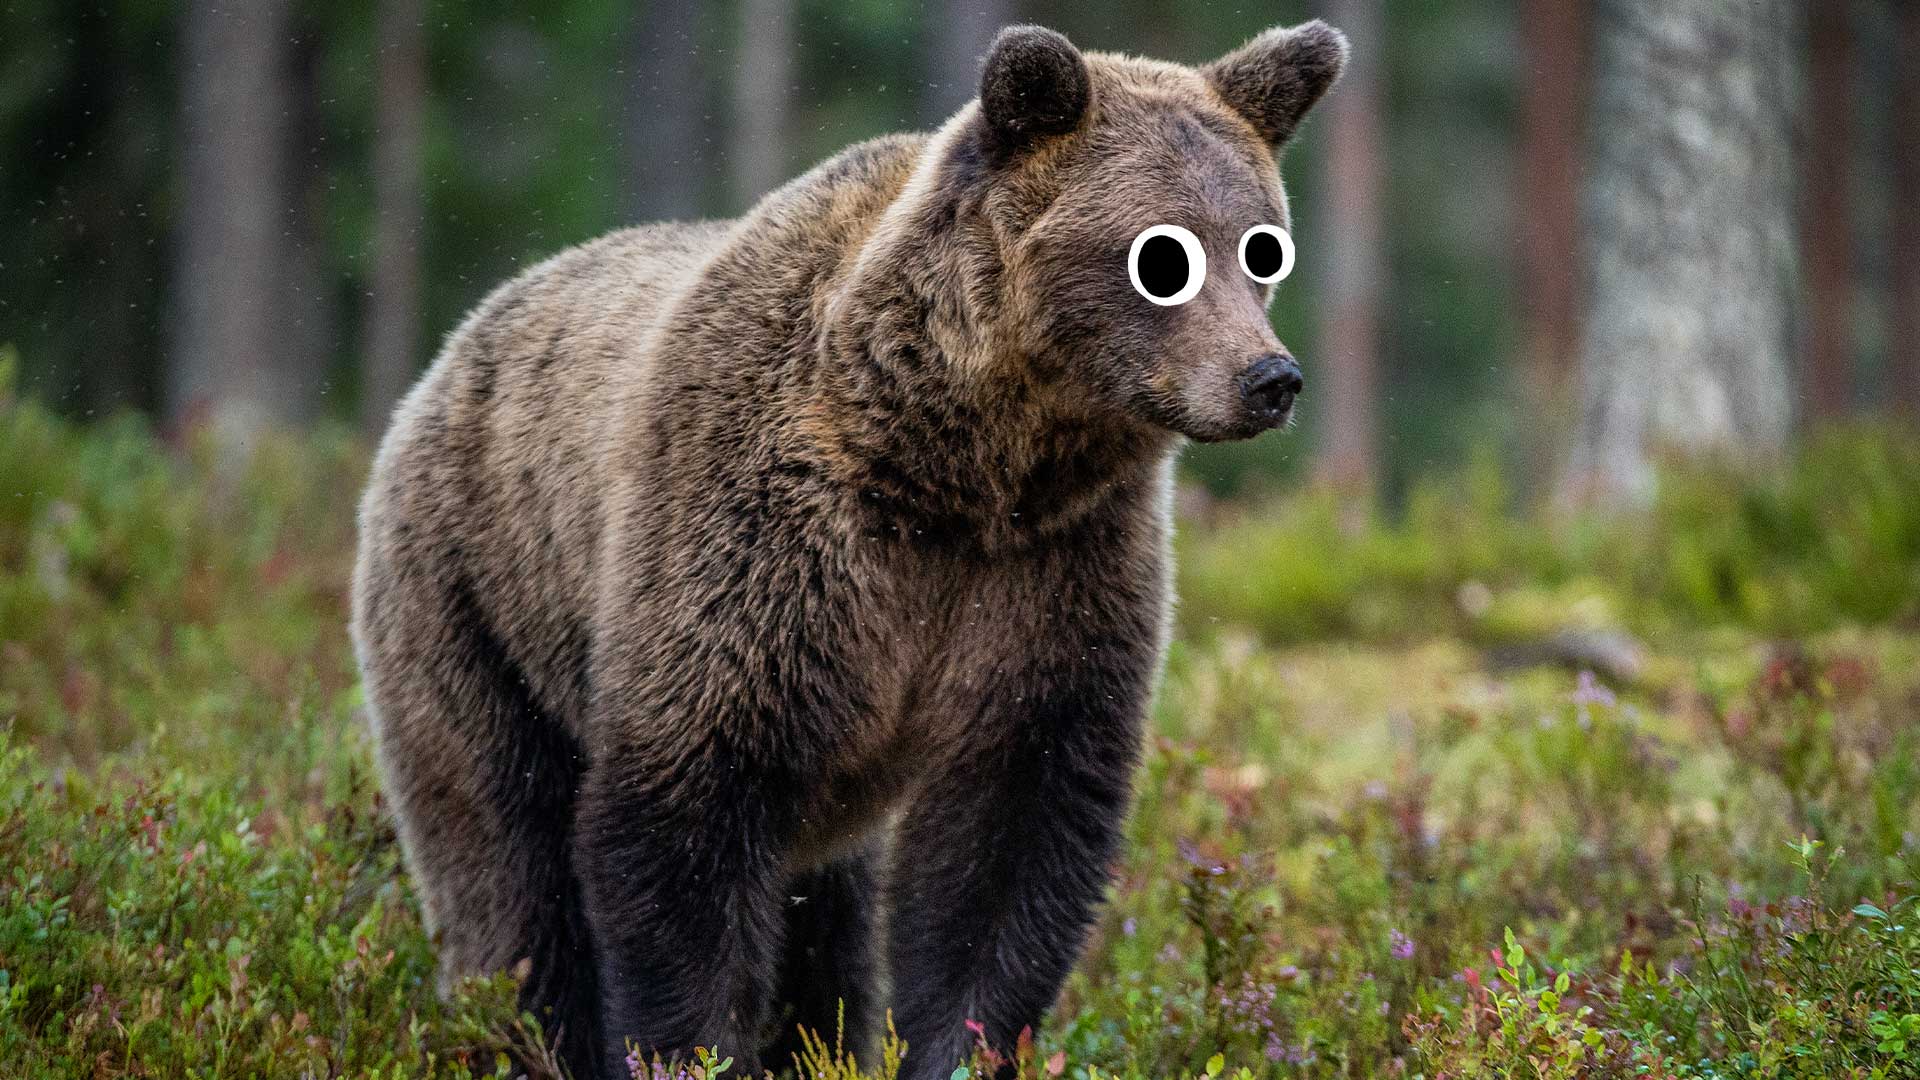 A bear walking around in a forest